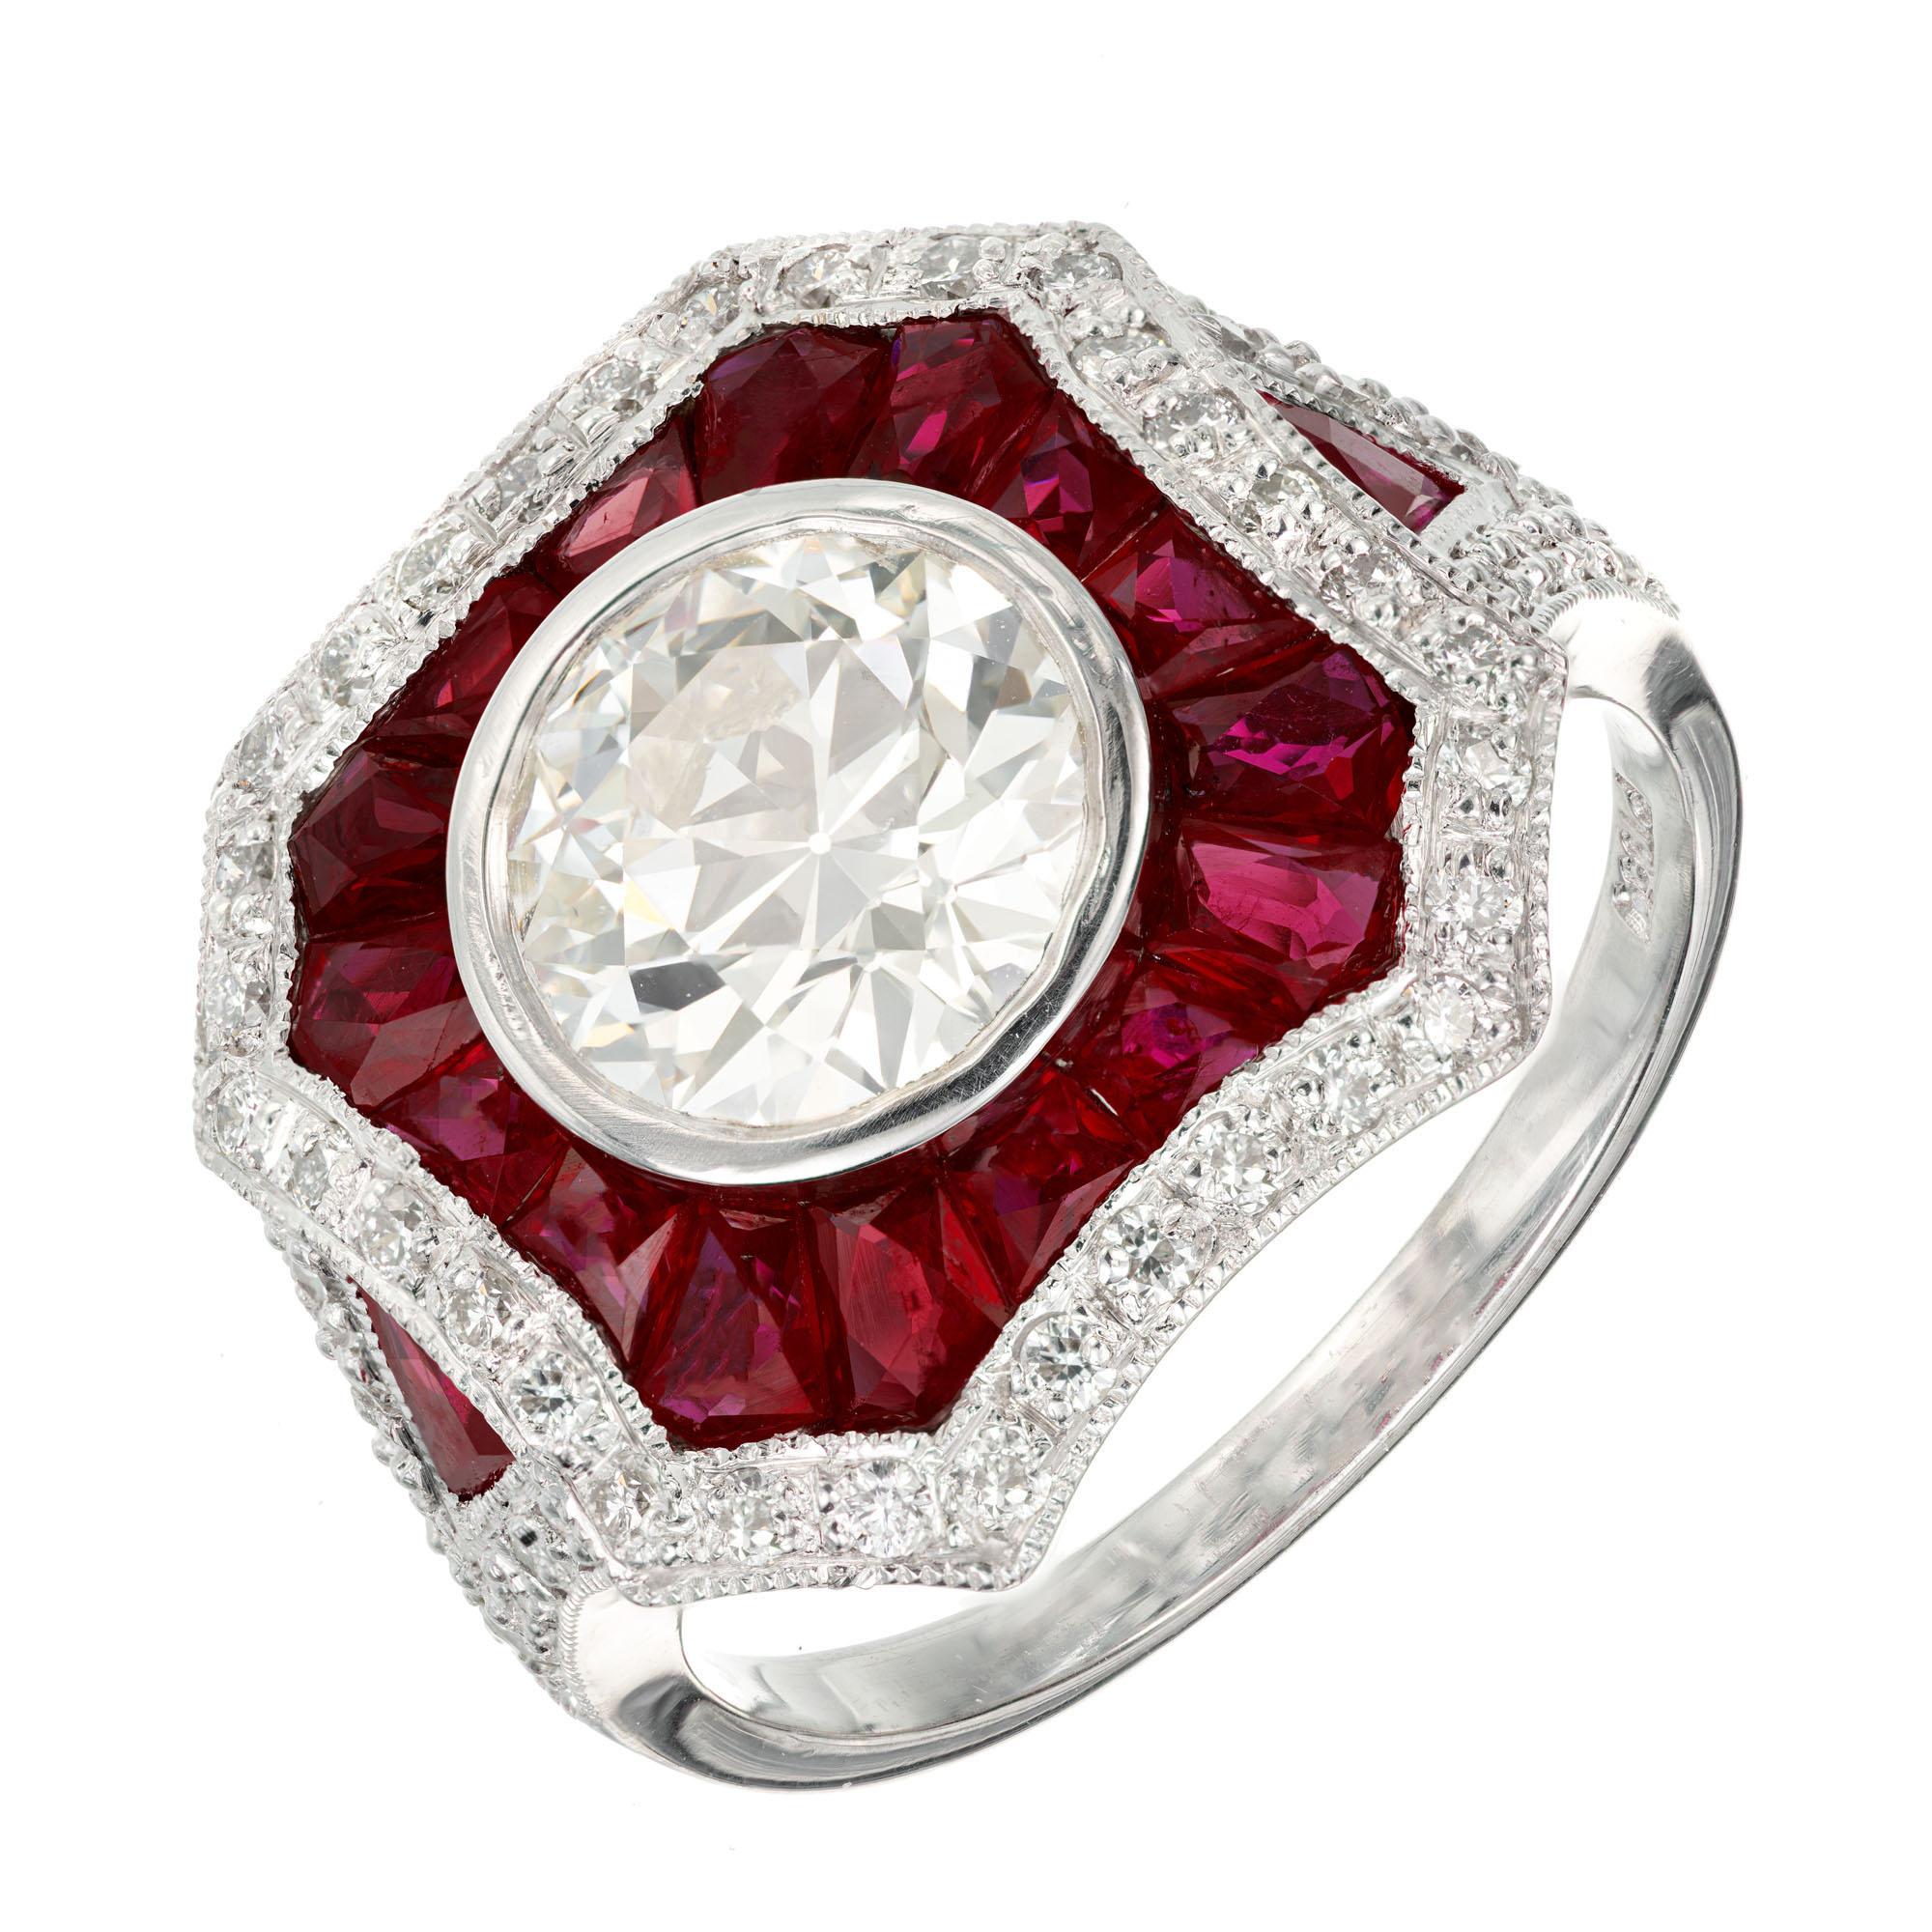 Art Deco inspired Diamond and ruby 